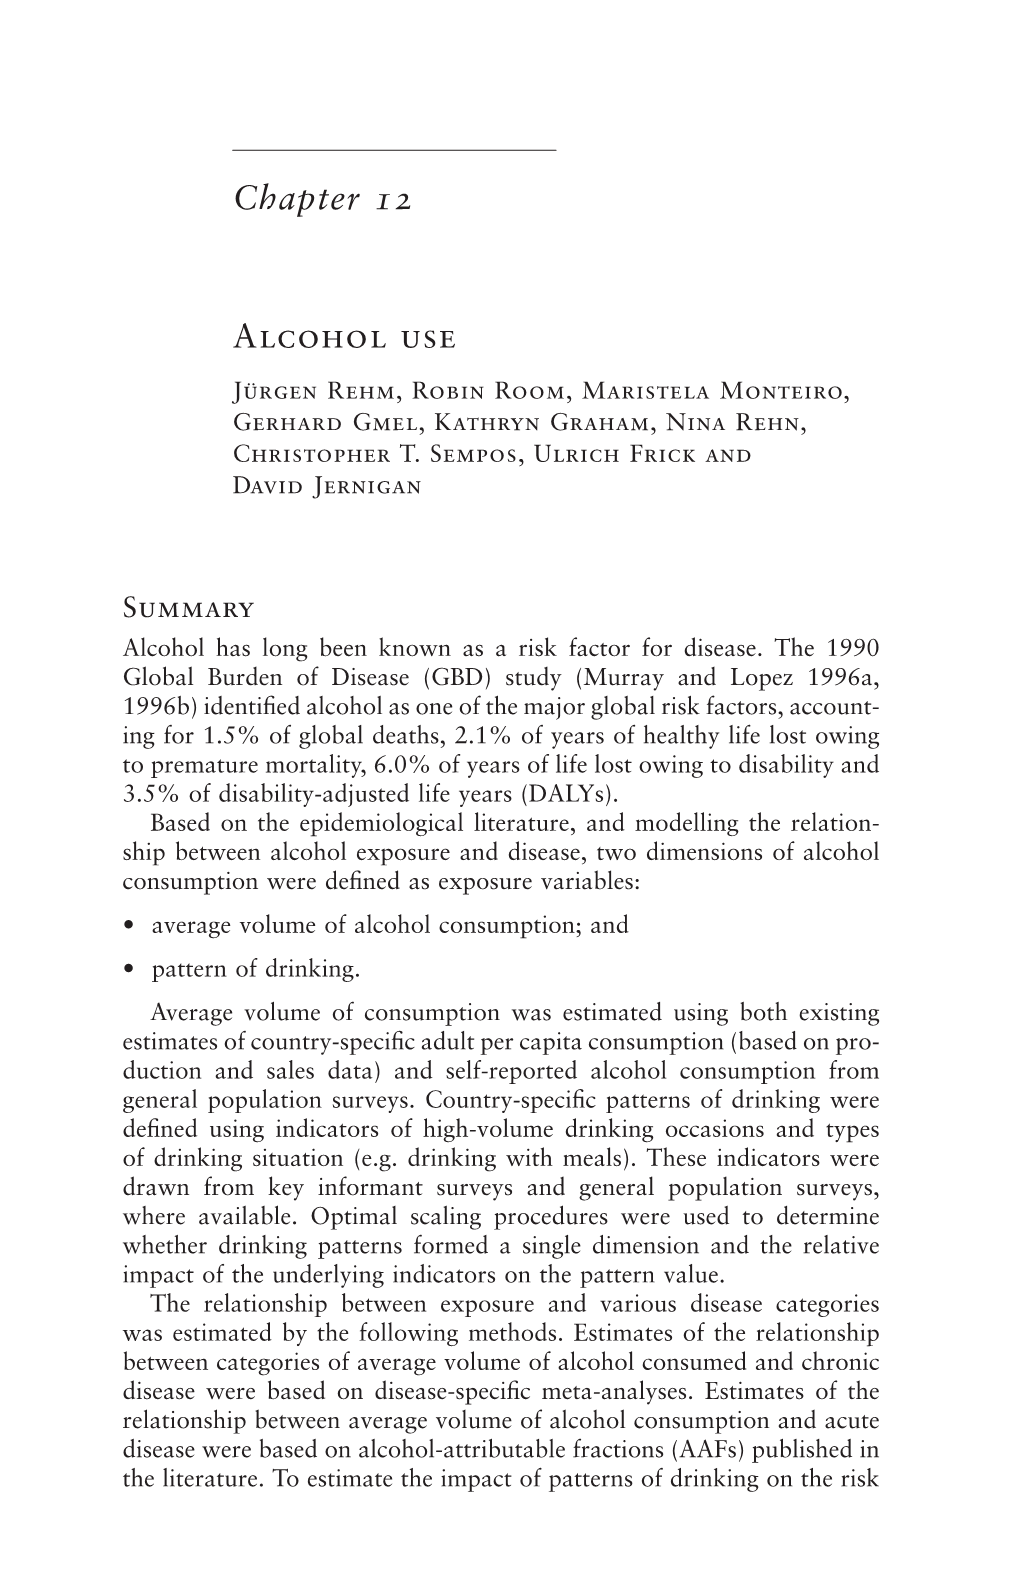 Chapter 12 ALCOHOL